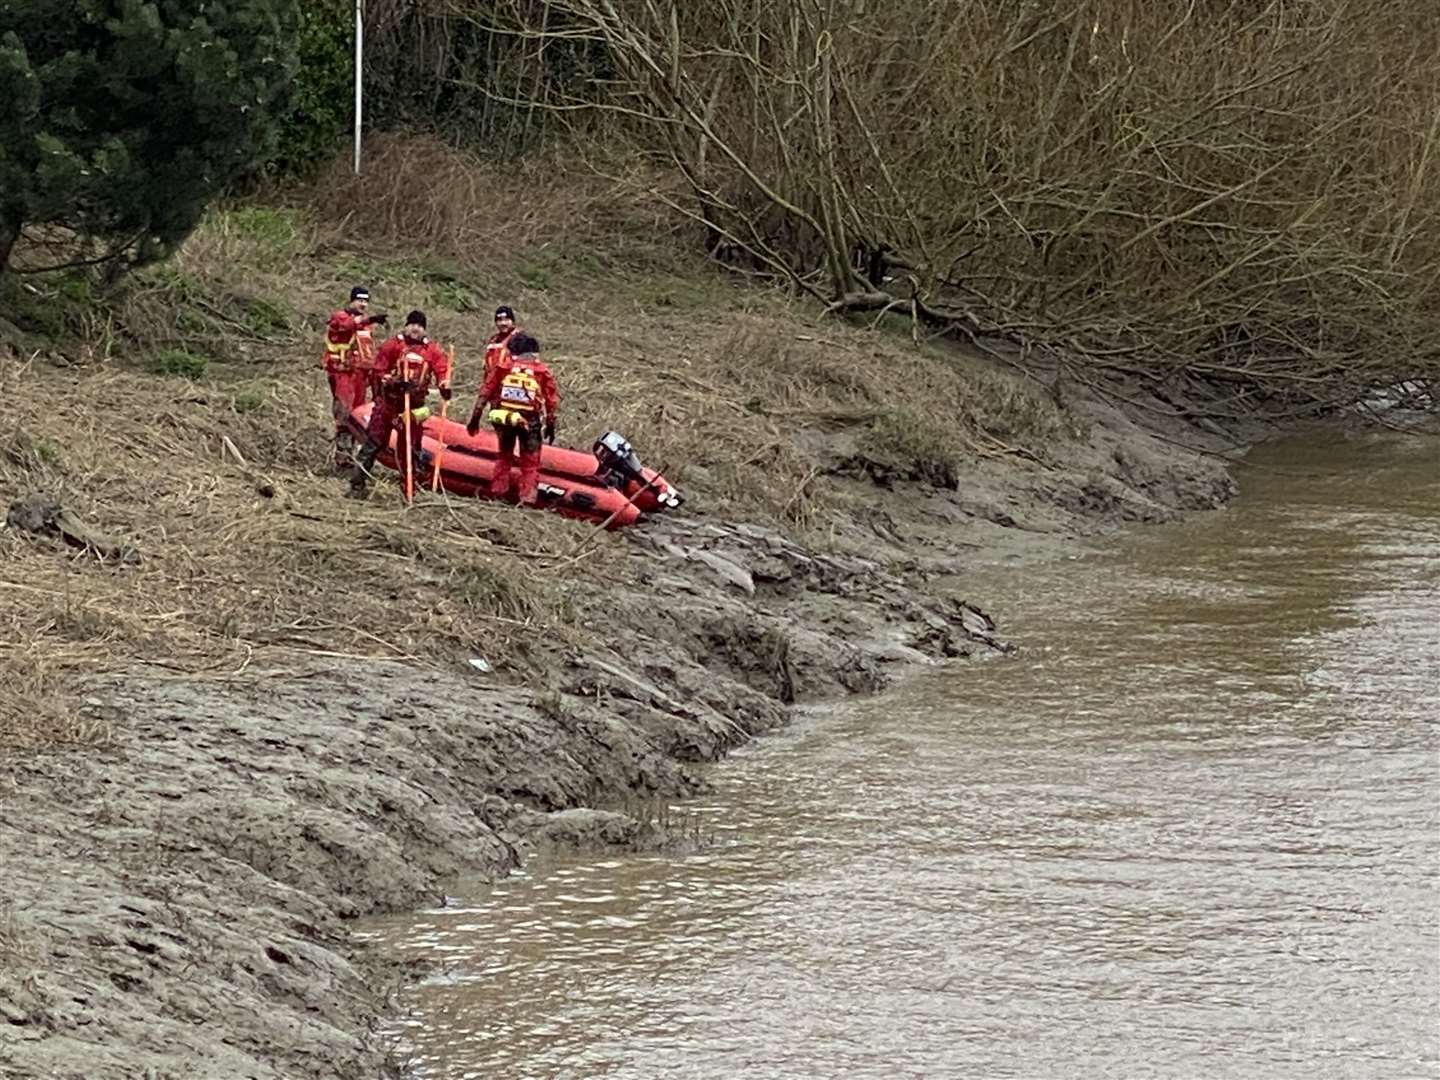 Search and Rescue have been dragging the river